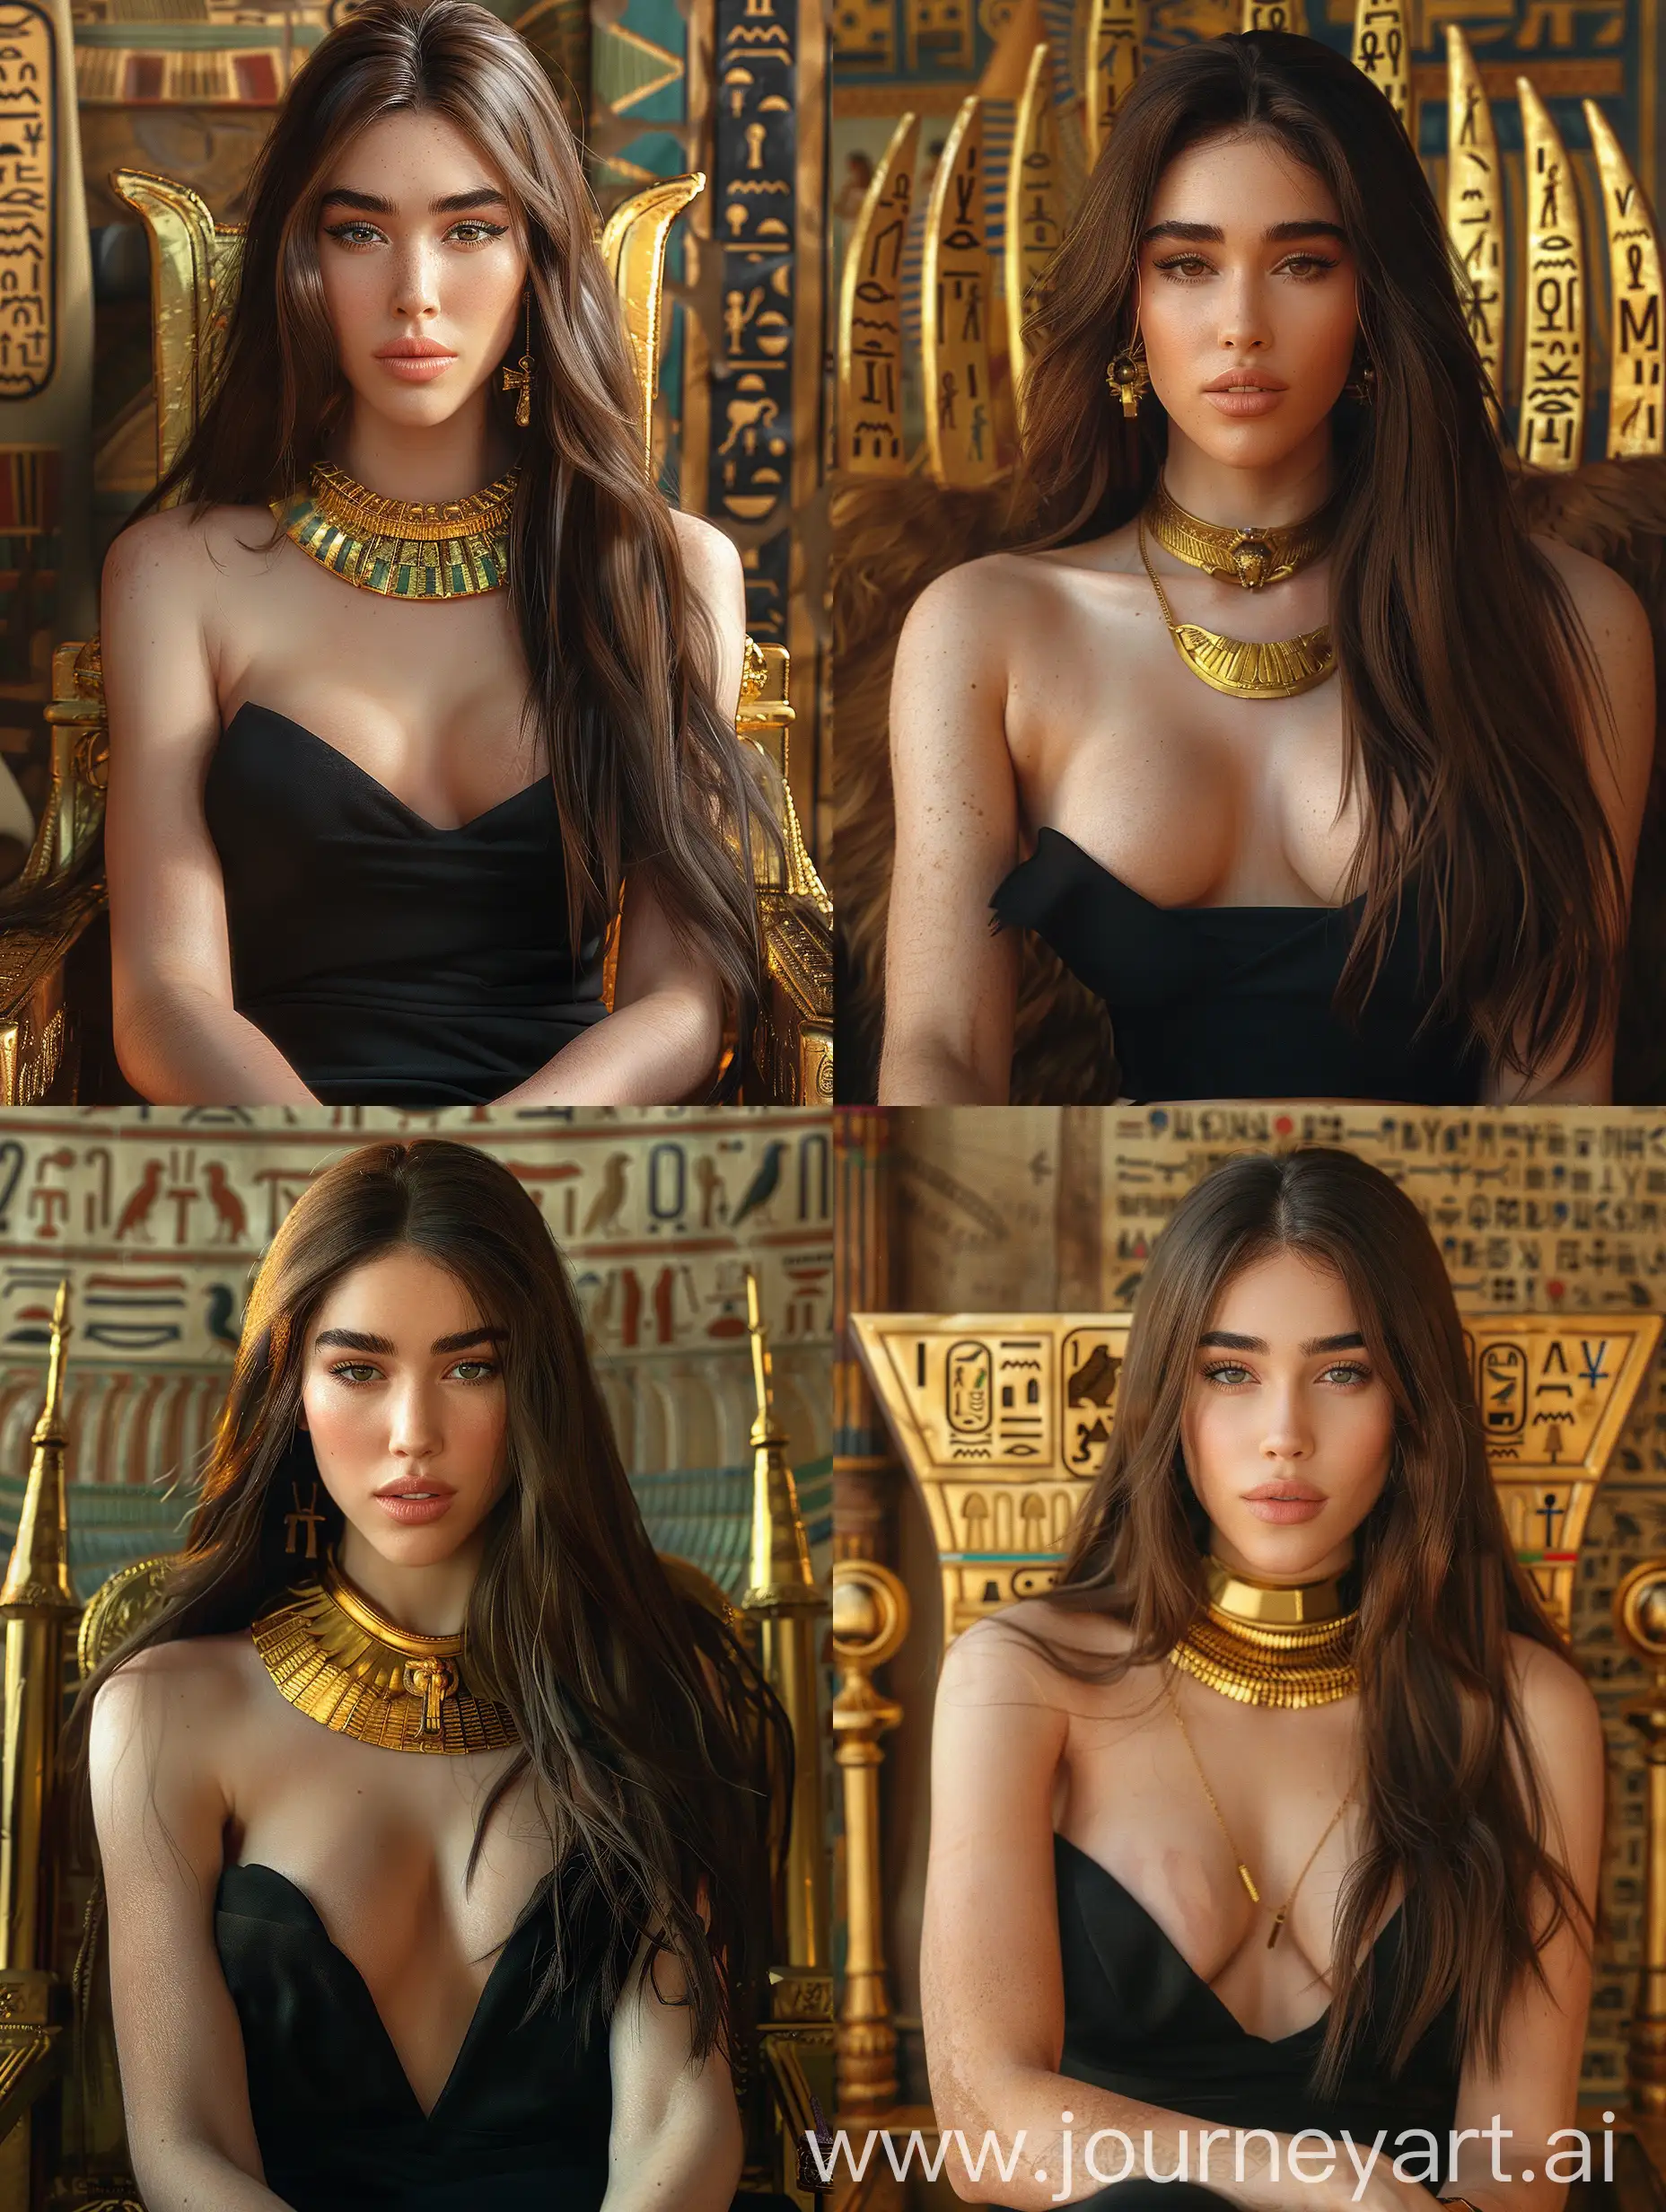 Regal Egyptian queen, Cleopatra inspired, seated on a golden throne, hieroglyphics, ancient Egypt, sunset lighting, intricate gold jewelry, elaborate headdress, papyrus in background, photorealistic painting --cref https://cdn.discordapp.com/attachments/1200713789763485788/1245011360576704593/images_76.jpg?ex=665732af&is=6655e12f&hm=602ca4195c6b955a603911f1c7ae6c7e3599cbc258f286cfbff9000526966f9a& --cw 100 --ar 3:4 --s 700 --v 6